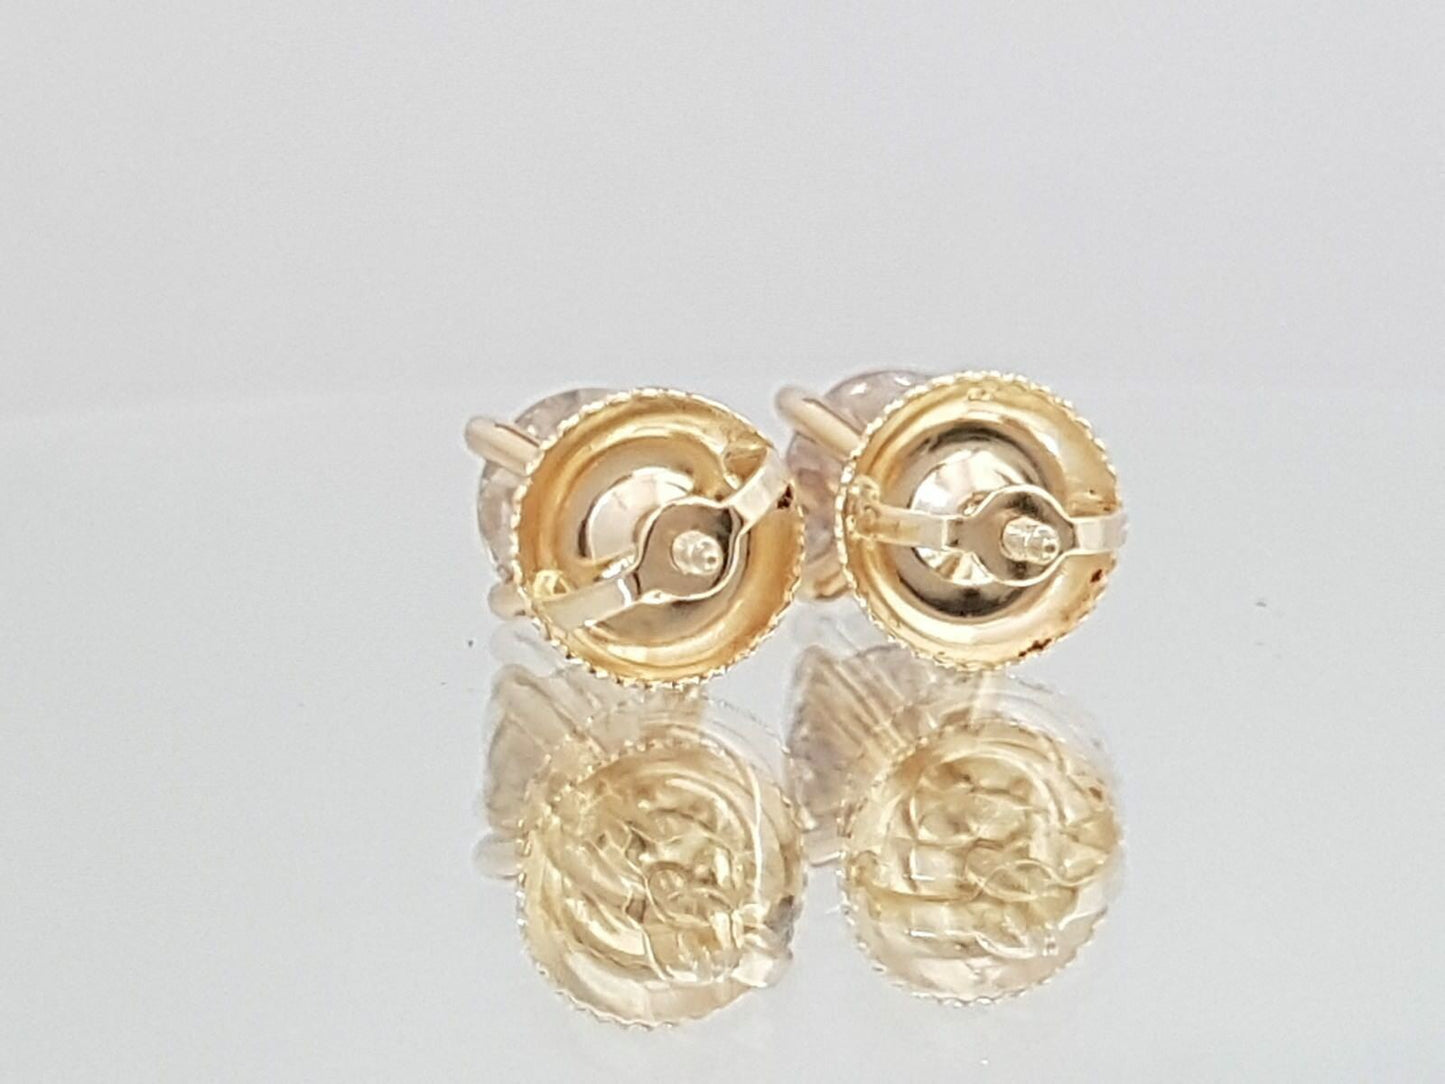 1.05 ct ROUND CUT diamond stud earrings 14k YELLOW GOLD COLOR 100% NATURAL K SI1